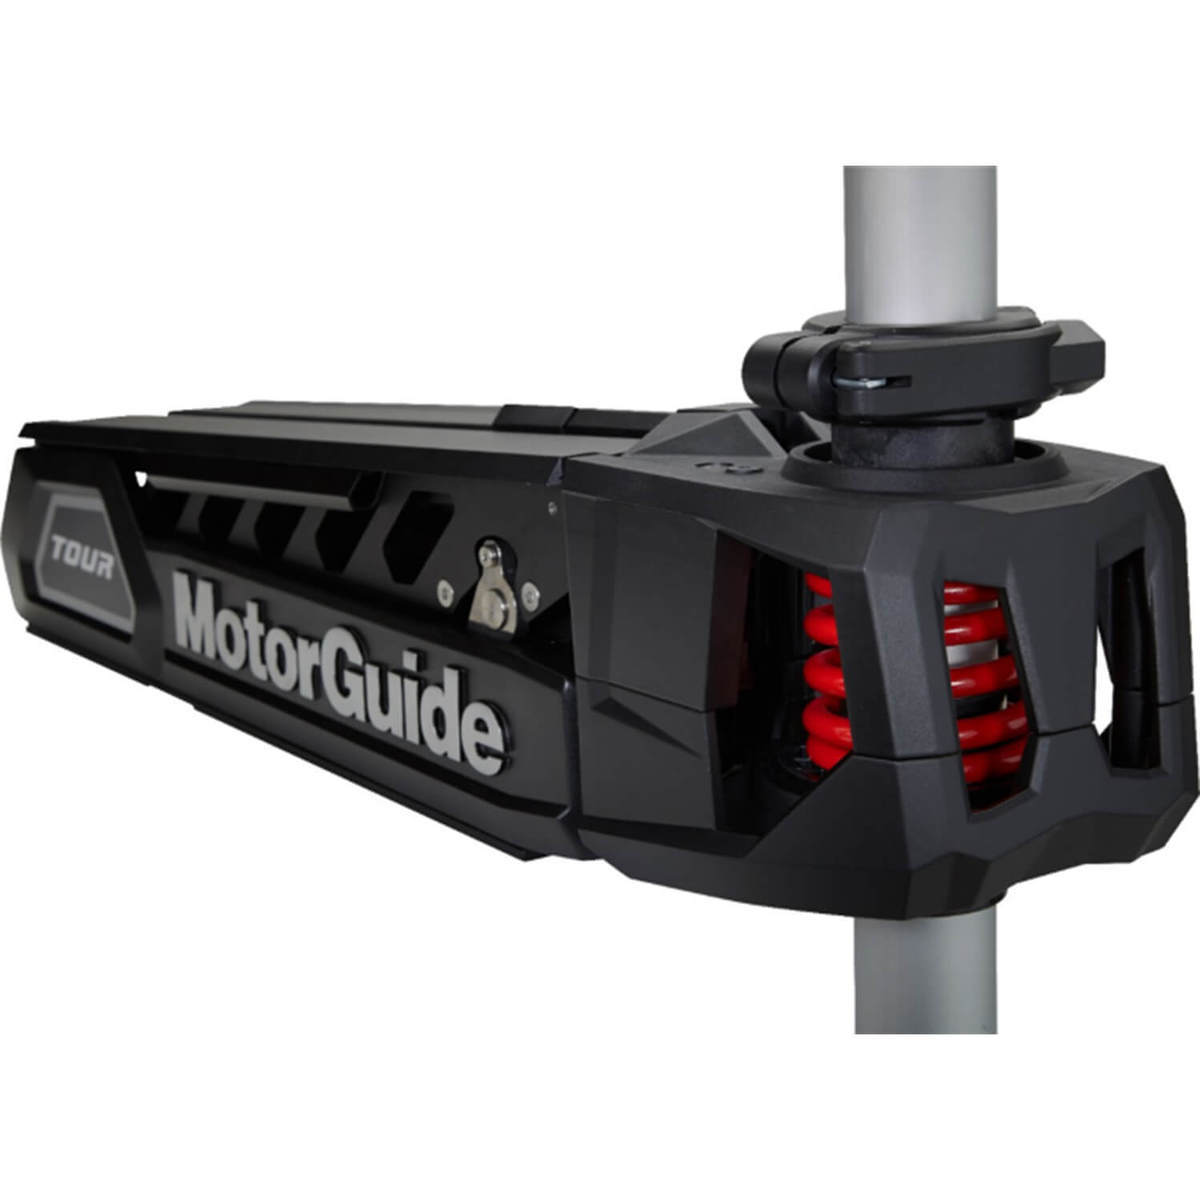 motorguide-tour-pro-bow-mount-electric-trolling-motor-with-pinpoint-gps